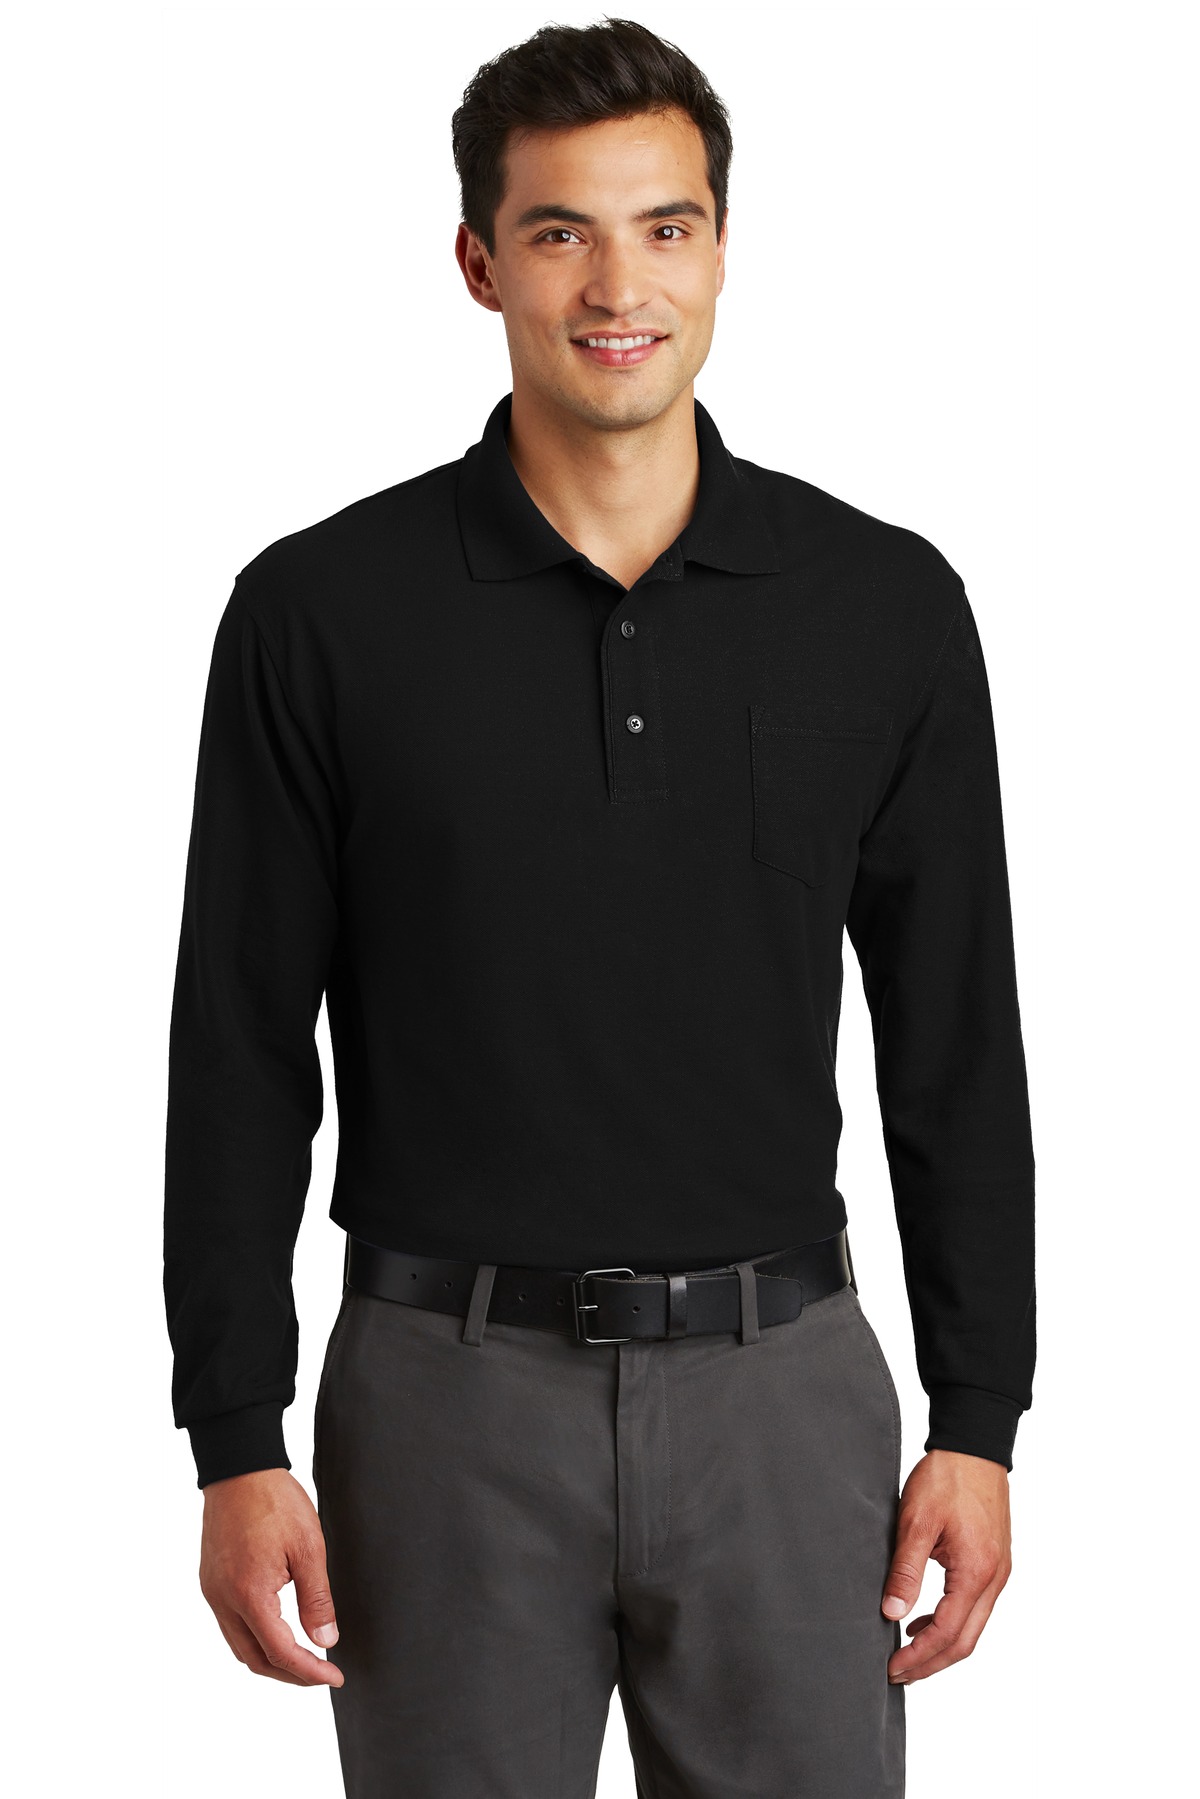 Port Authority Long Sleeve Silk TouchPolo with Pocket - K500LSP